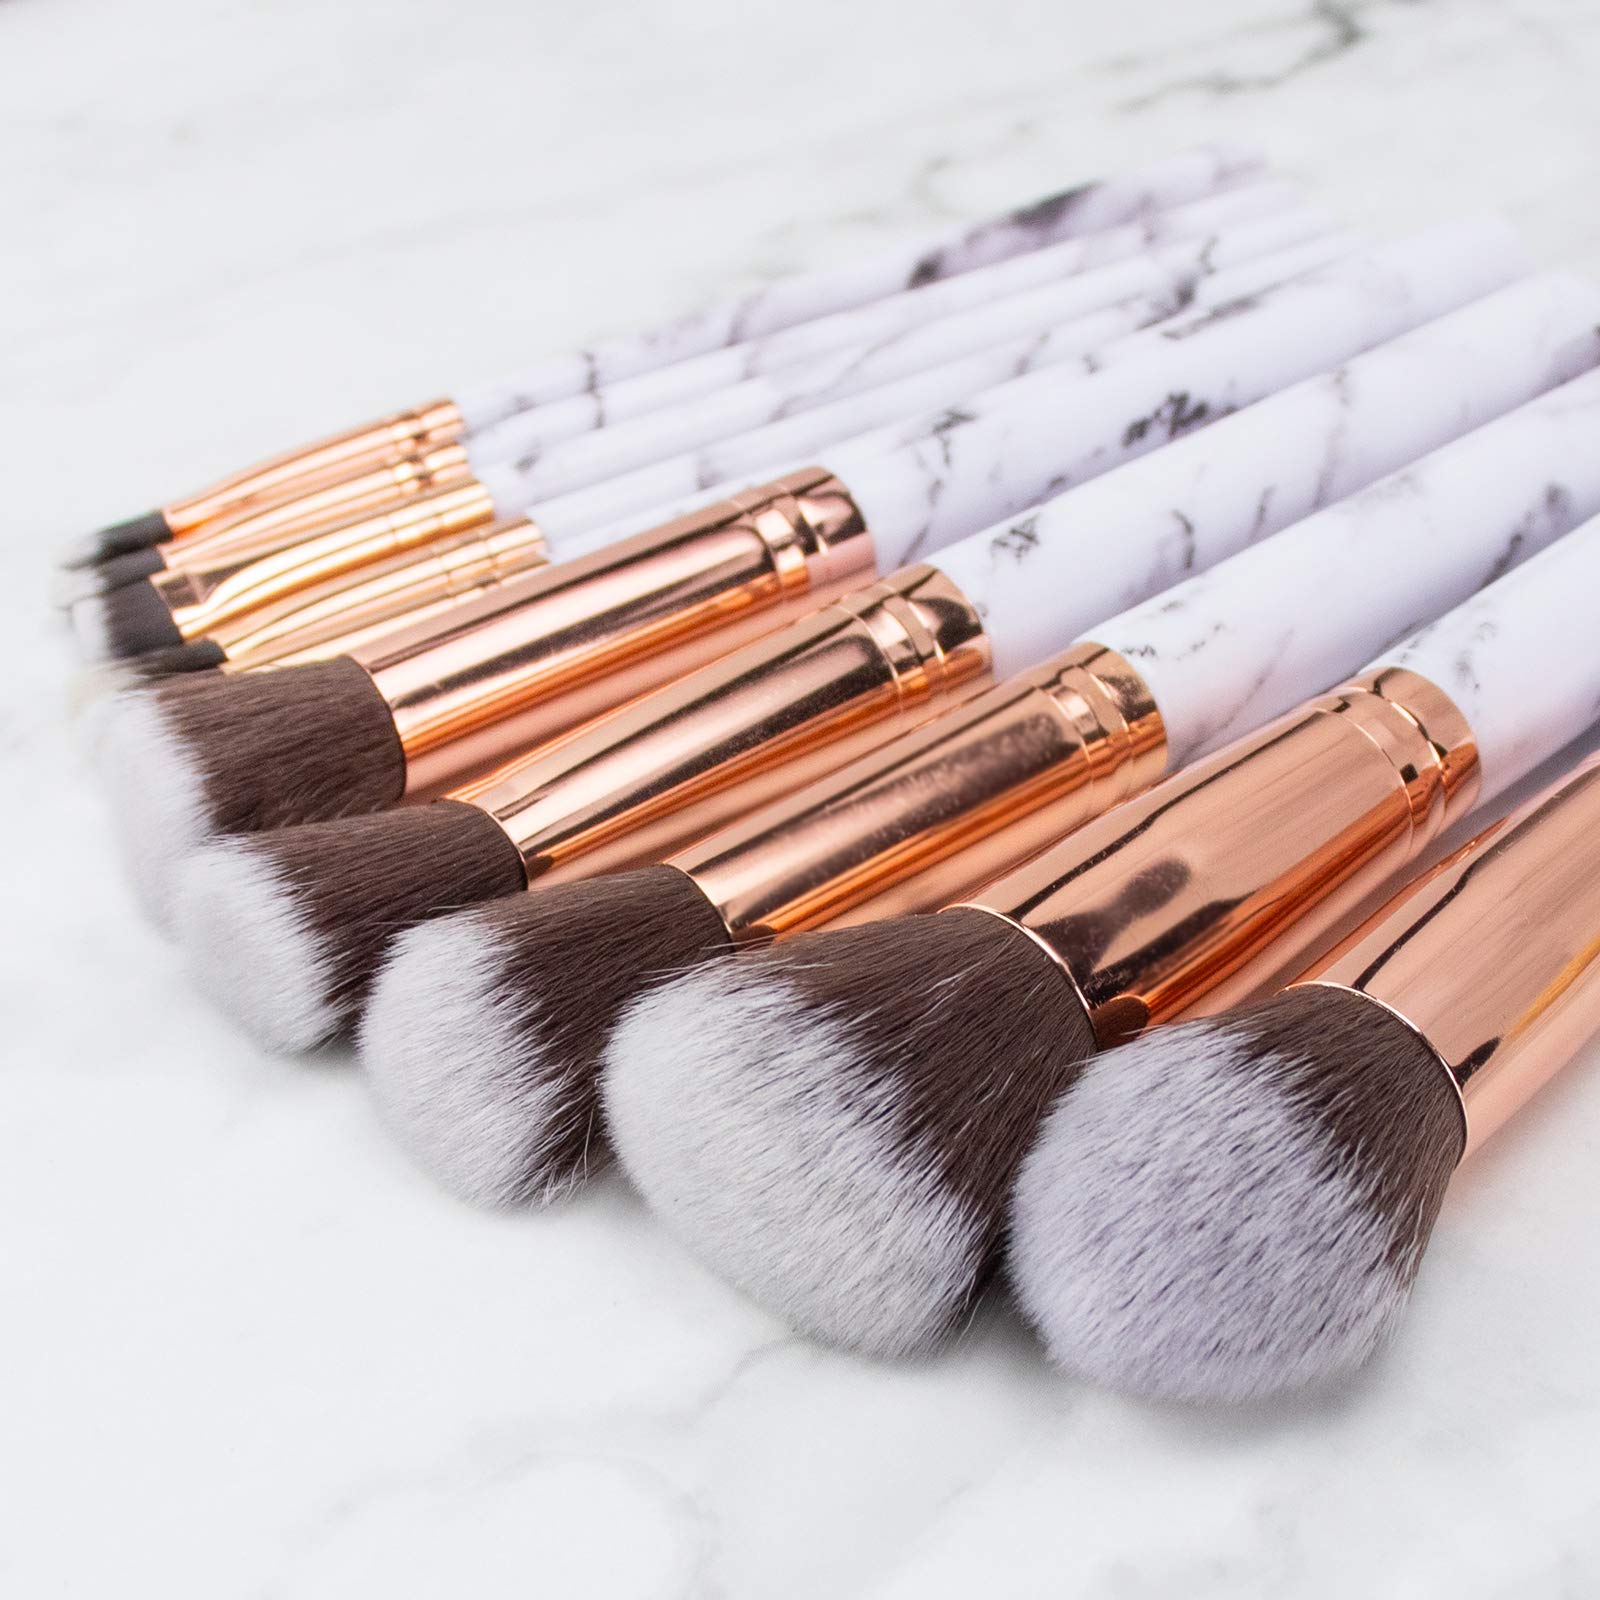 Marble Makeup Brush Set With Case - 10 PCS Marble Makeup Brushes - 4 PCS Makeup Sponges - Makeup Brush Holders - Professional Beauty Blender and Brush Set (15 pieces)